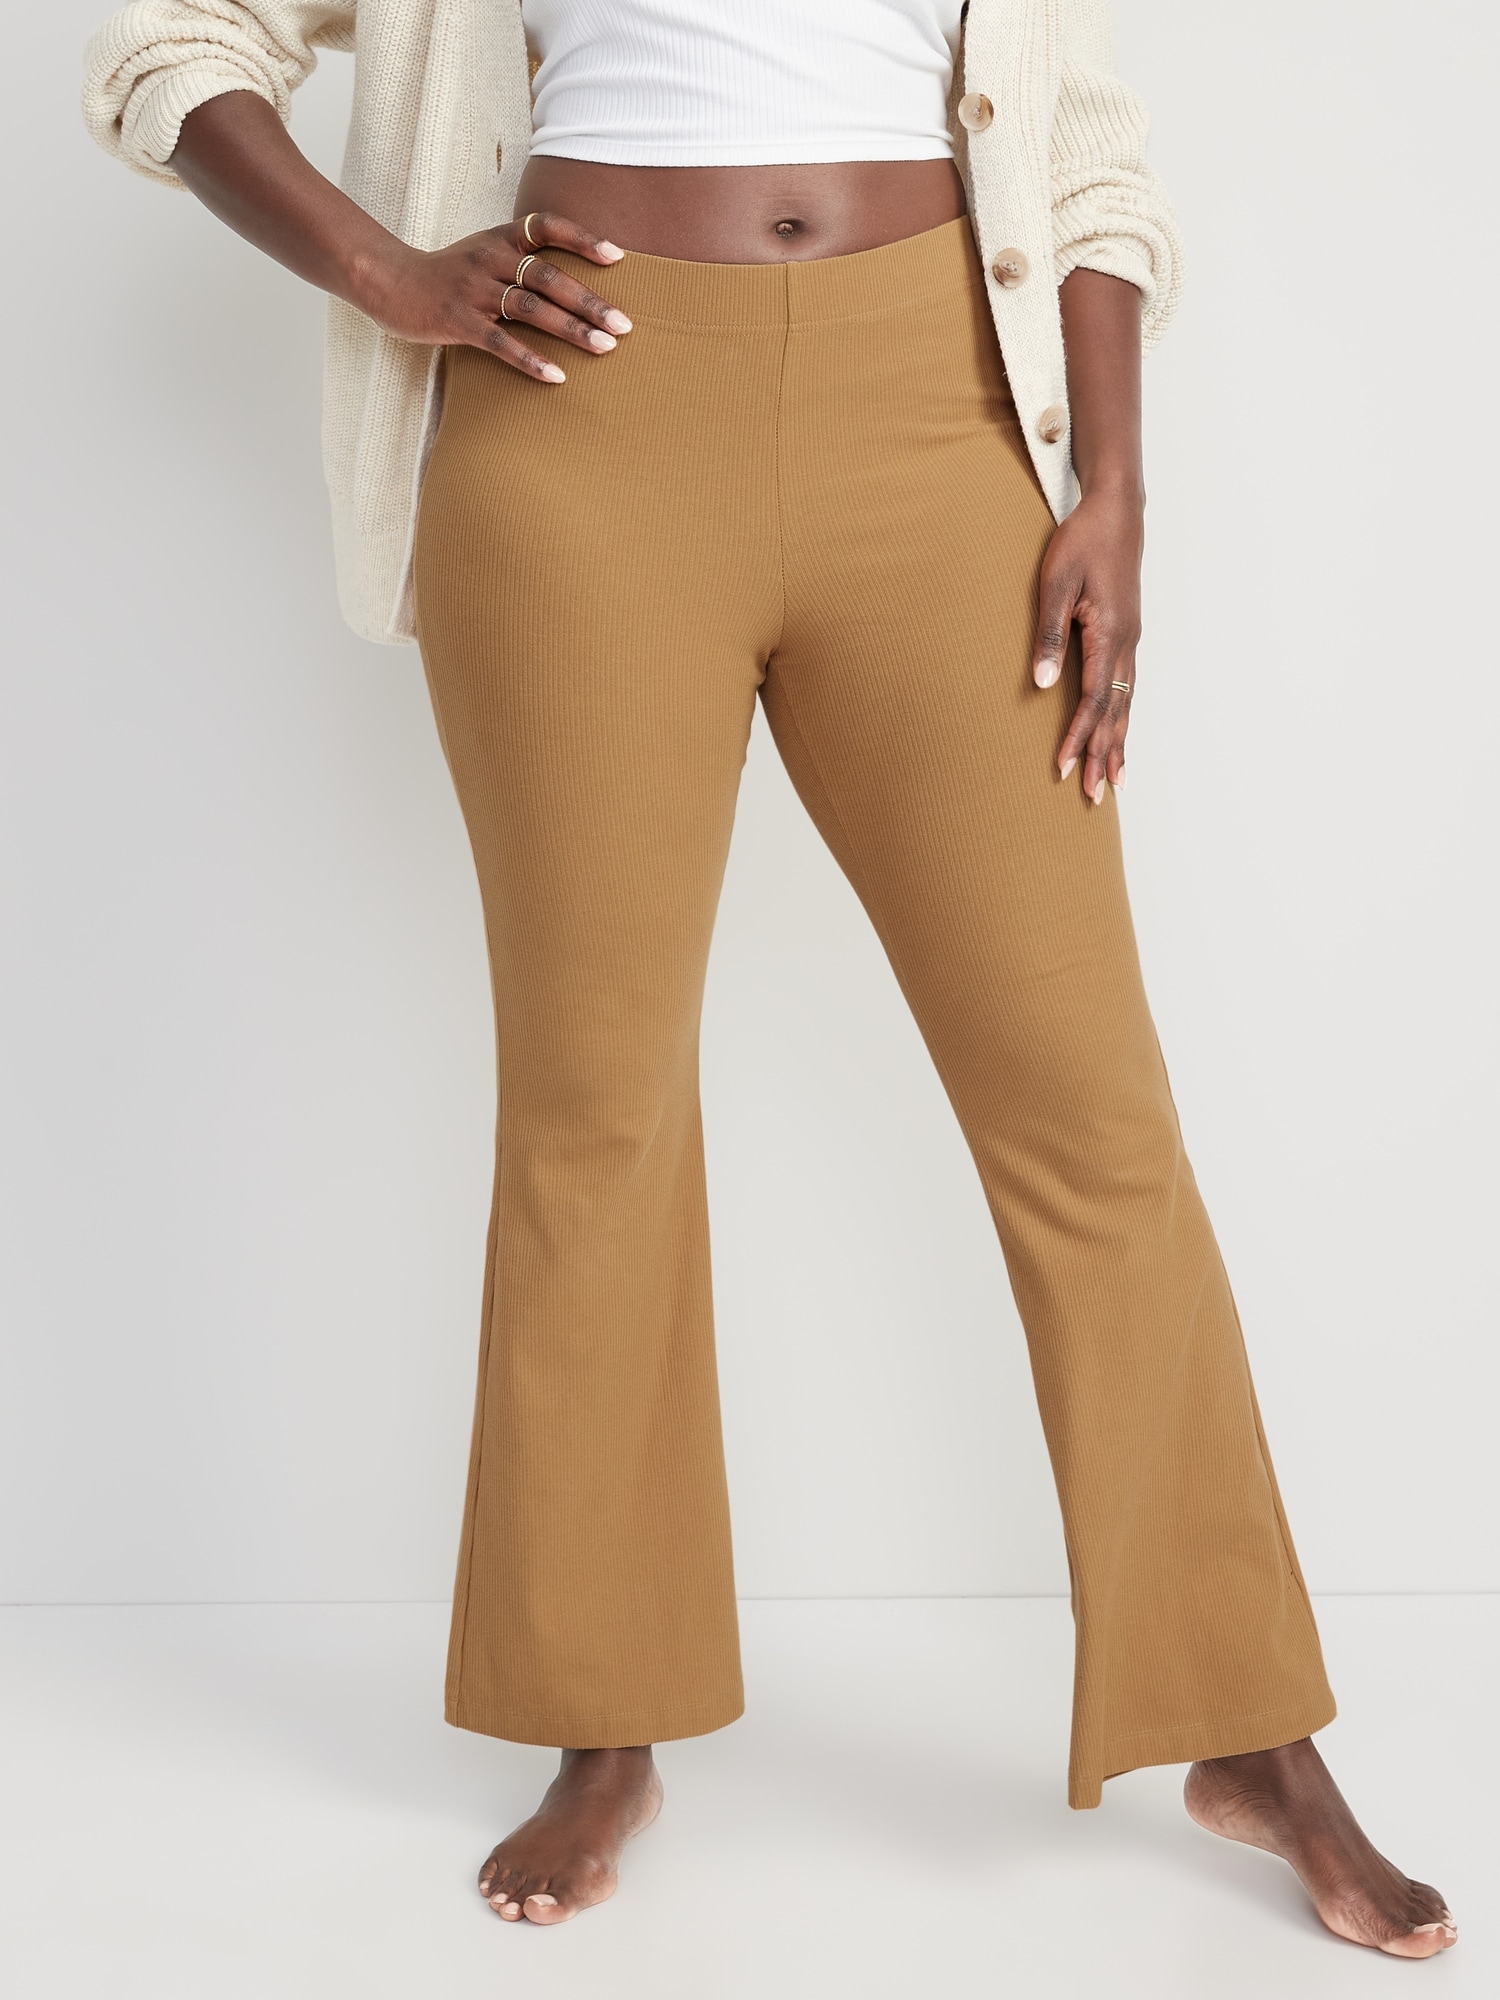 Old Navy - High-Waisted Rib-Knit Cropped Leggings for Women